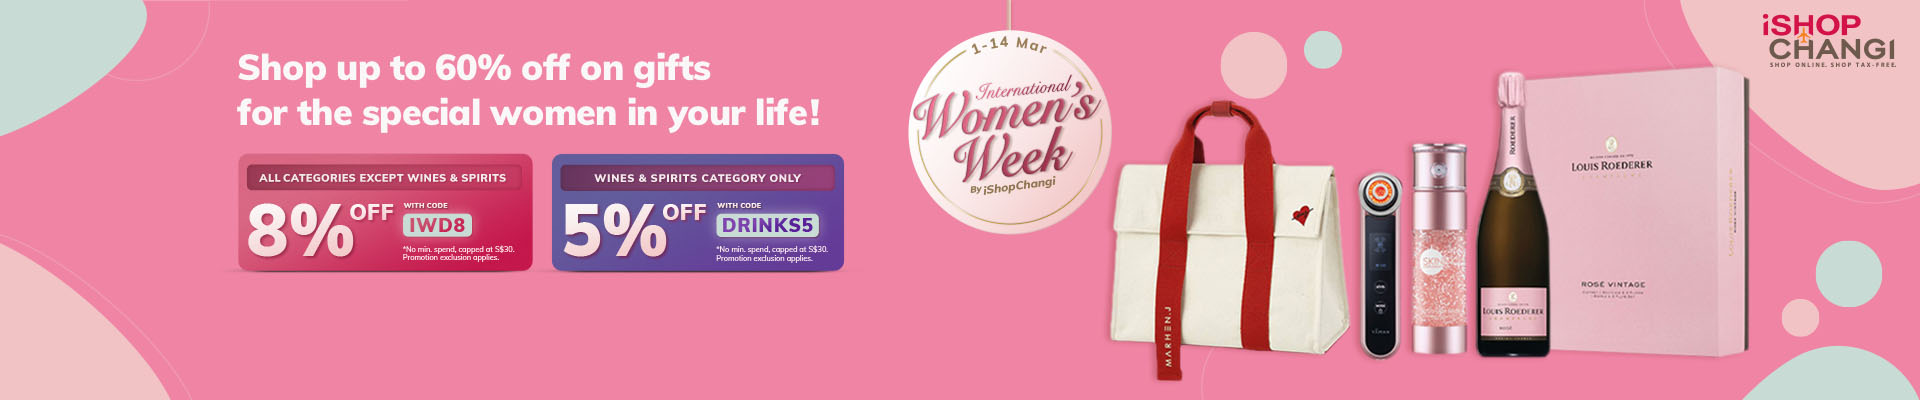 Make This International Women's Week Unforgettable with iShopChangi's Exclusive Discounts and Promotions